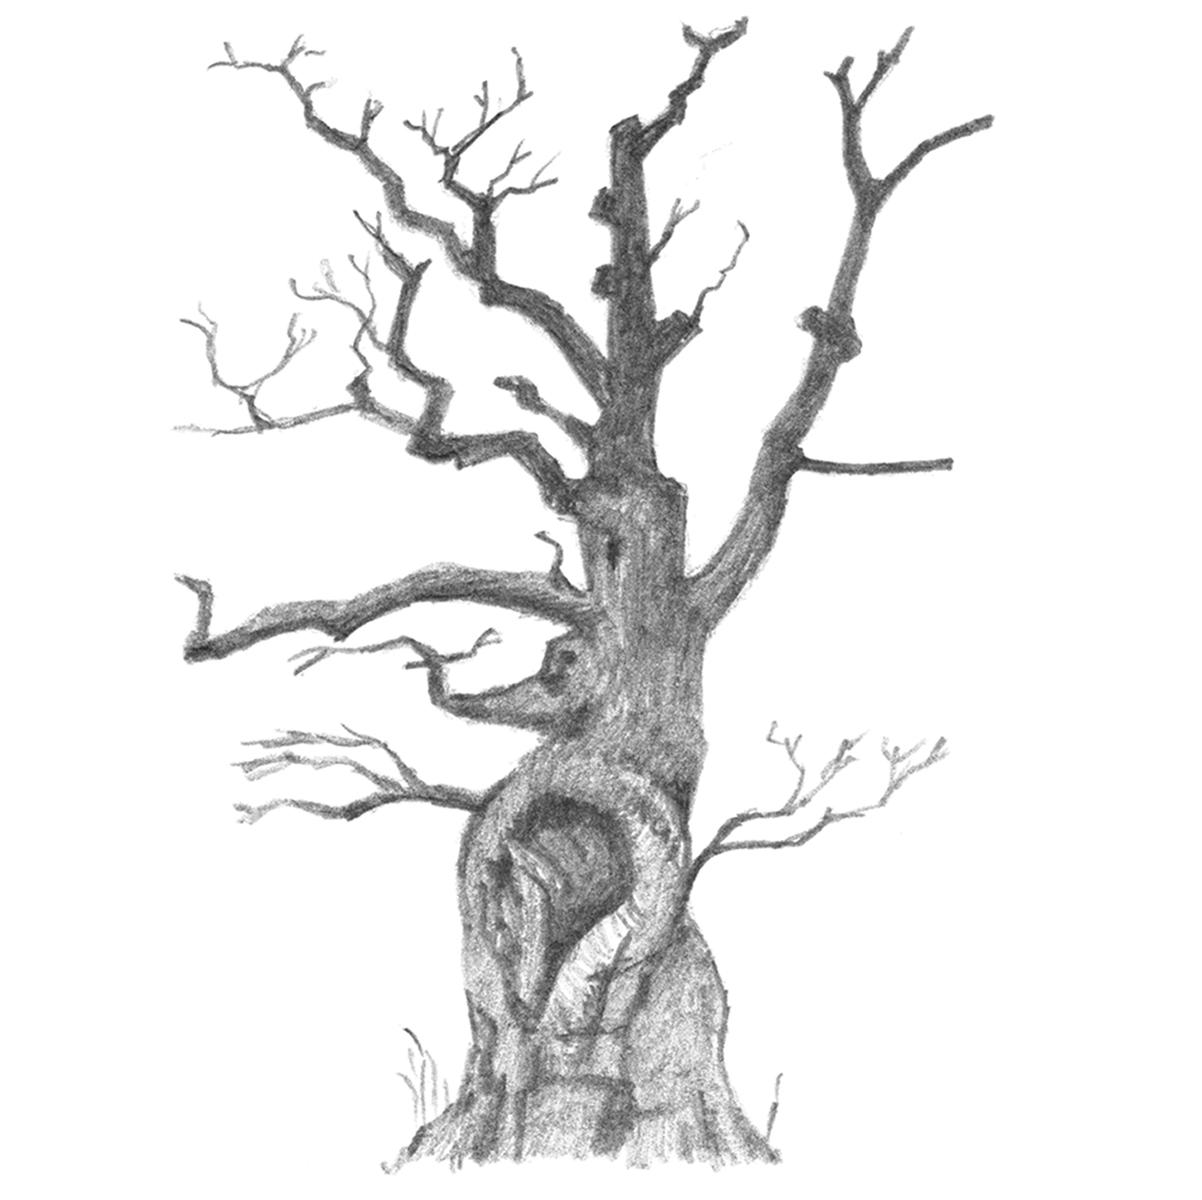 Limited edition print from pencil sketch of a tree